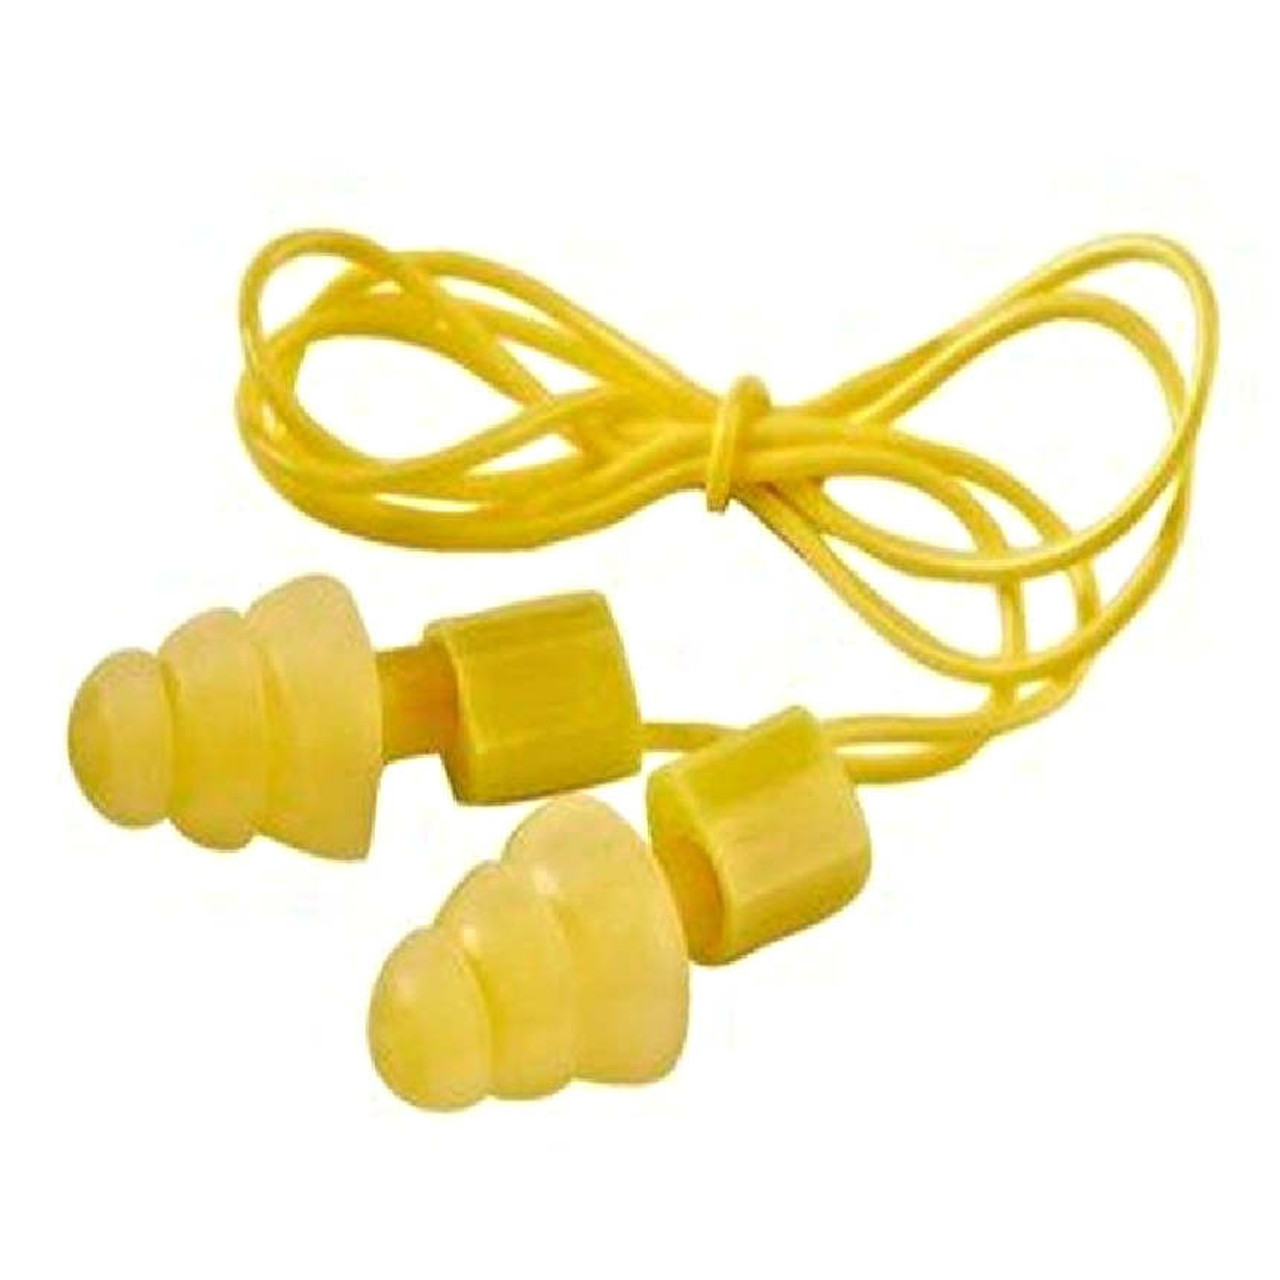 3M E-A-R Ultrafit 20 Earplugs Individually Packed with plastic case